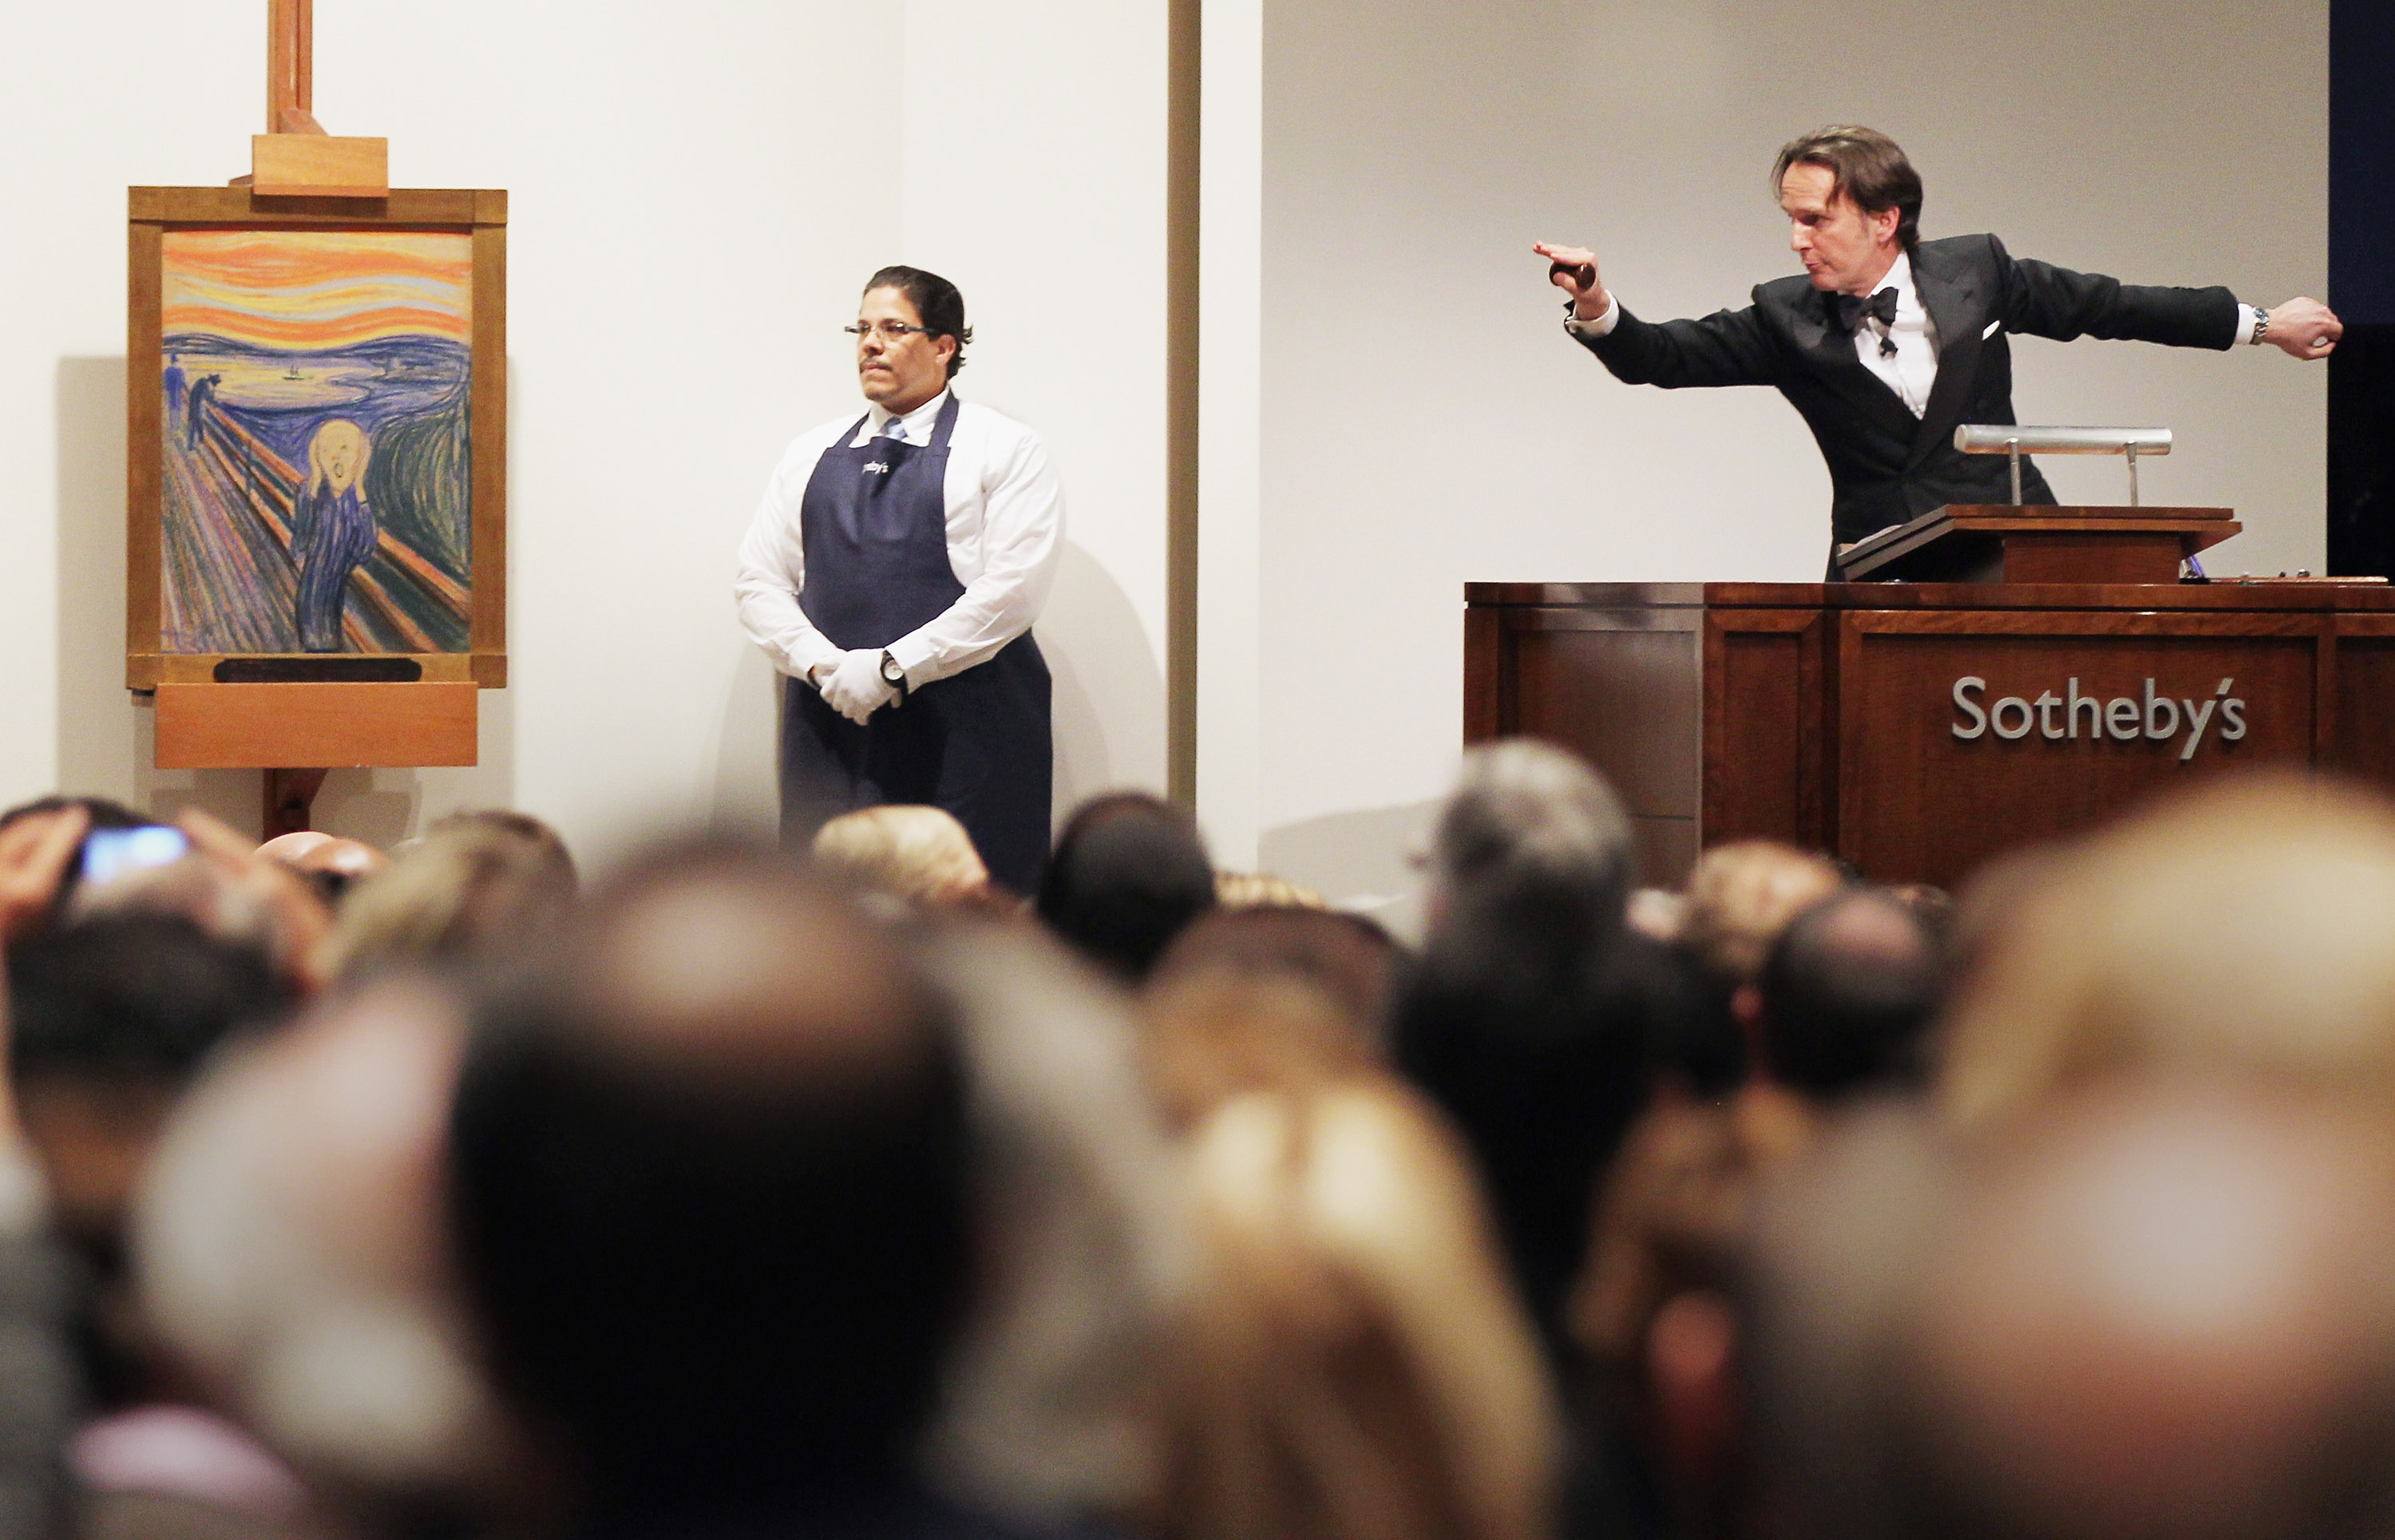 Edvard Munch's 'The Scream' is auctioned at Sotheby's May 2012 in New York City. (Mario Tama—Getty Images)